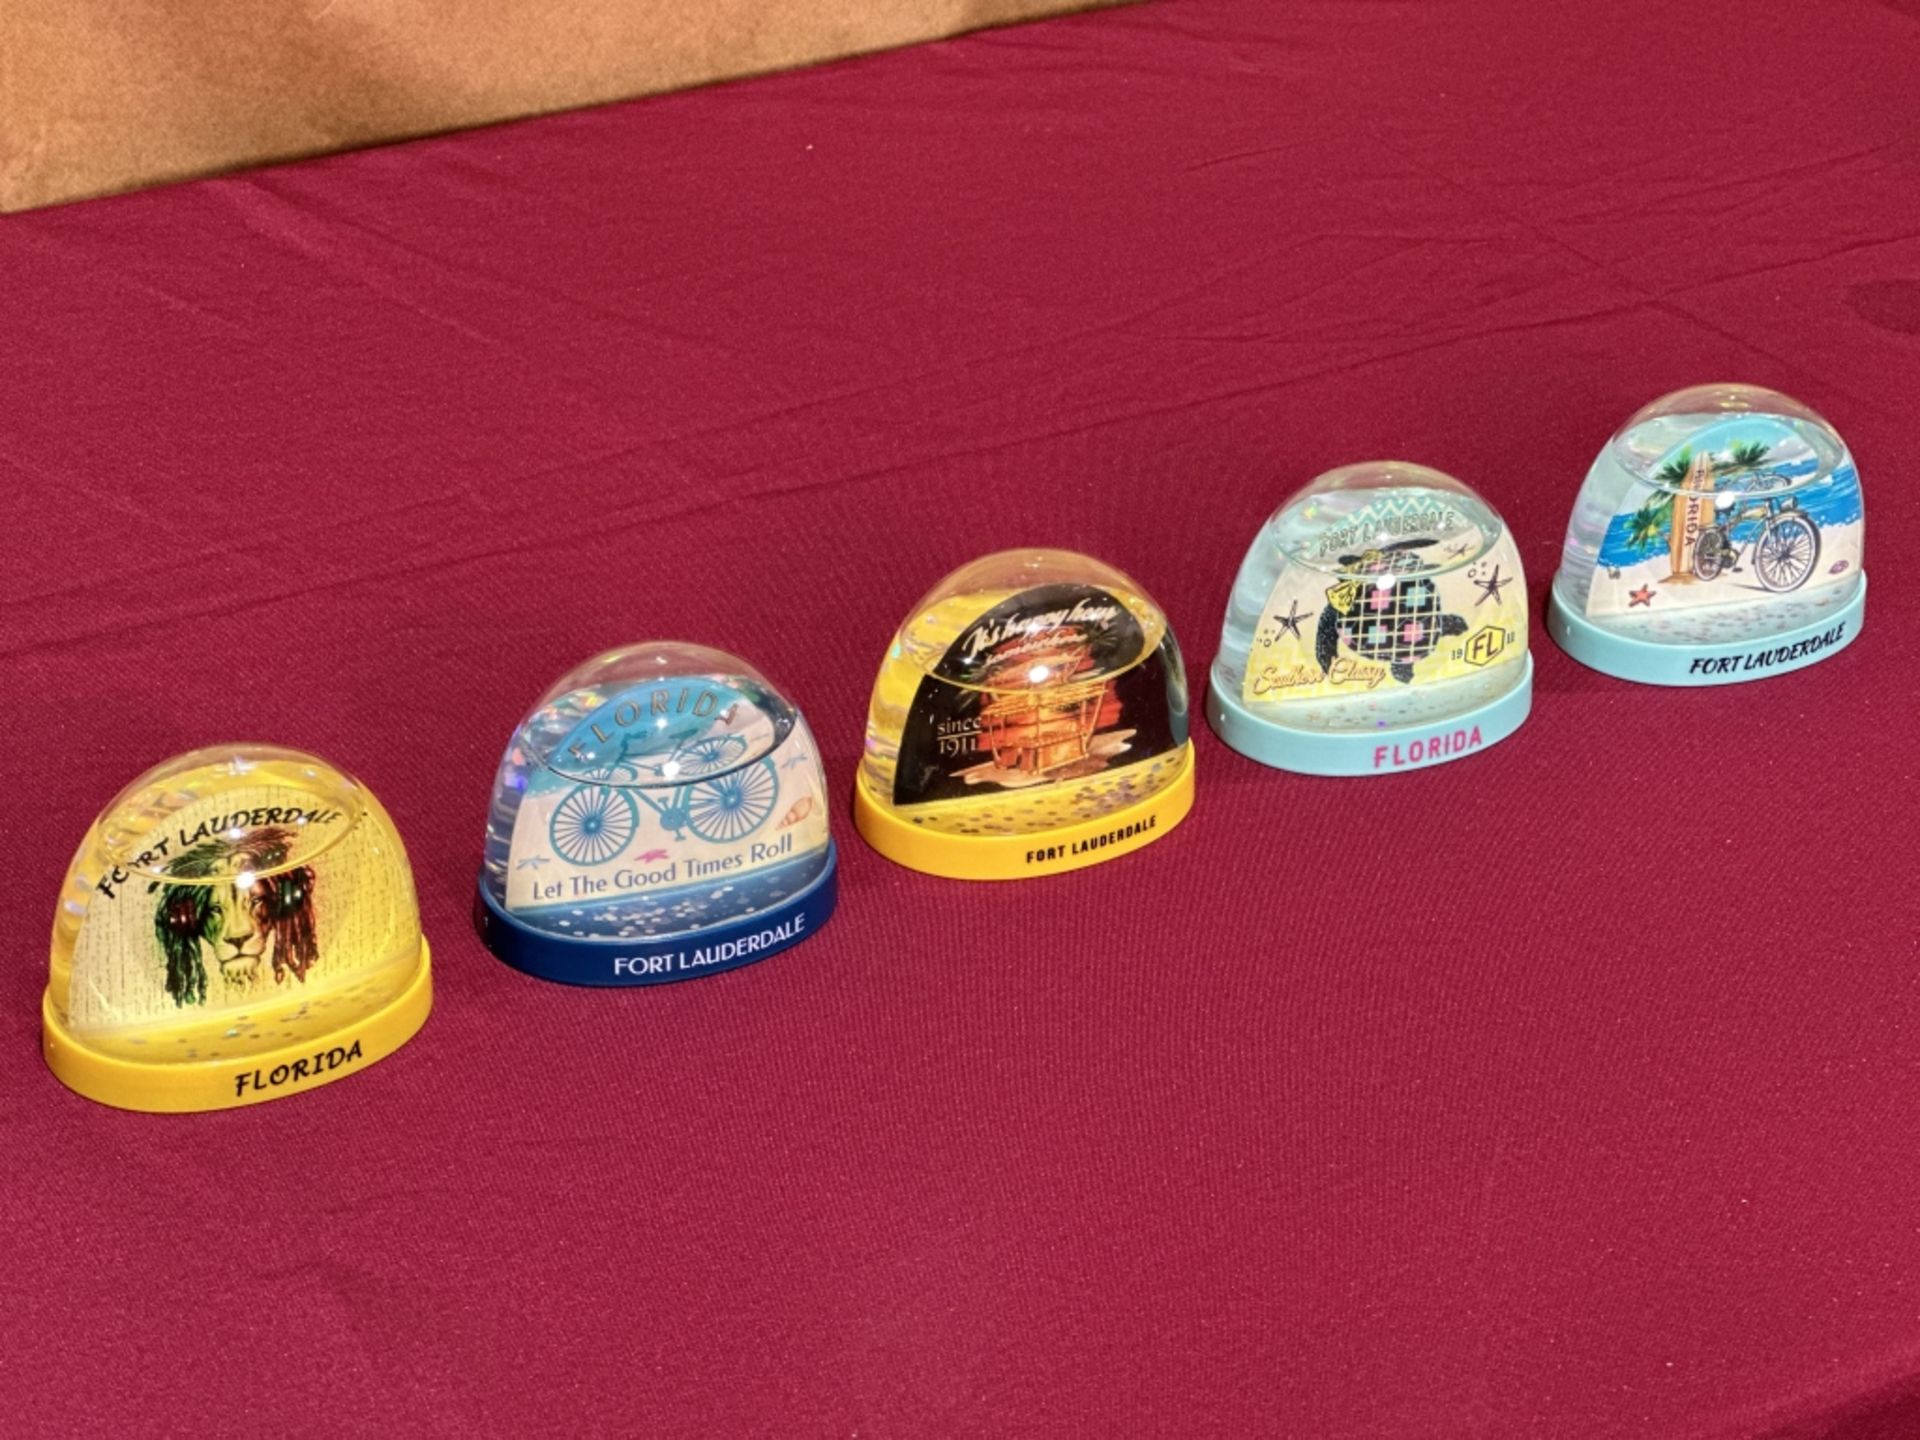 LOT CONSISTING OF ASSORTED BEACH-THEMED SOUVENIRS - Image 11 of 12